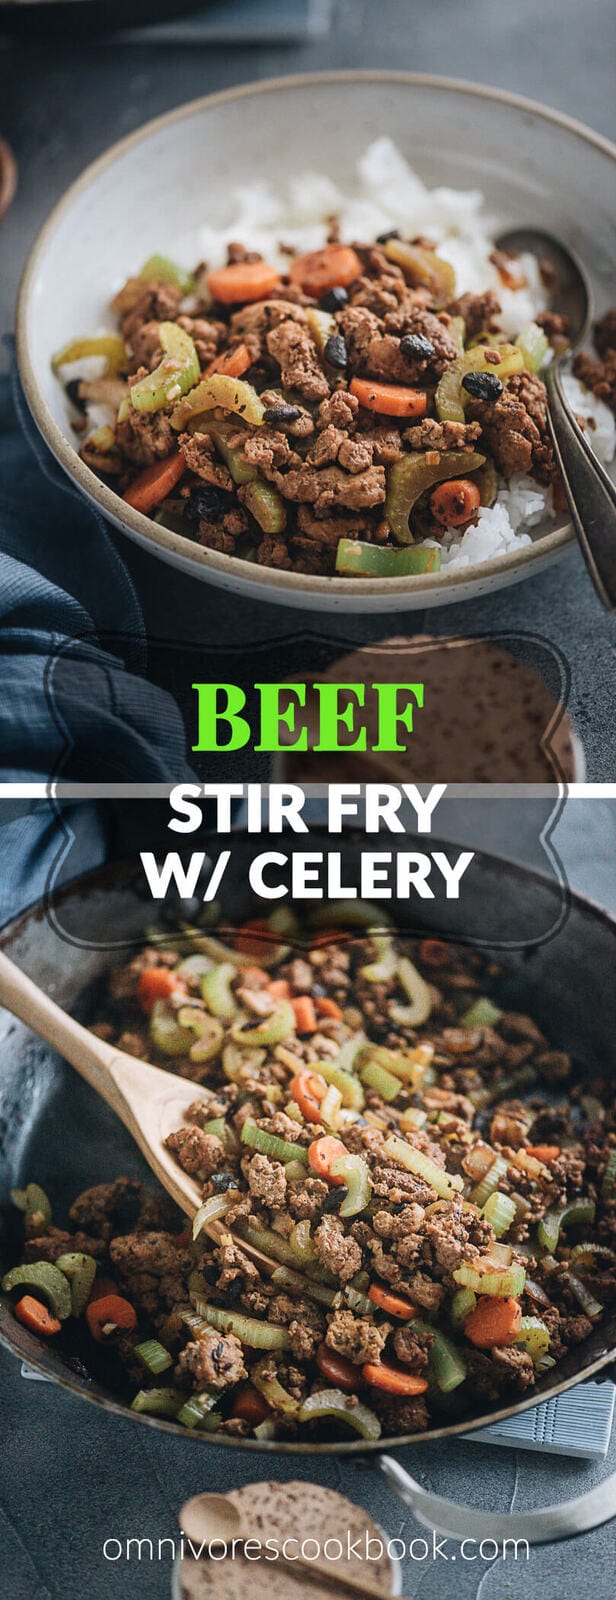 Ground Beef Stir Fry with Celery - A savory beef dish that hits all the right notes and can be on your table in less than 30 minutes. {Gluten-Free adaptable}